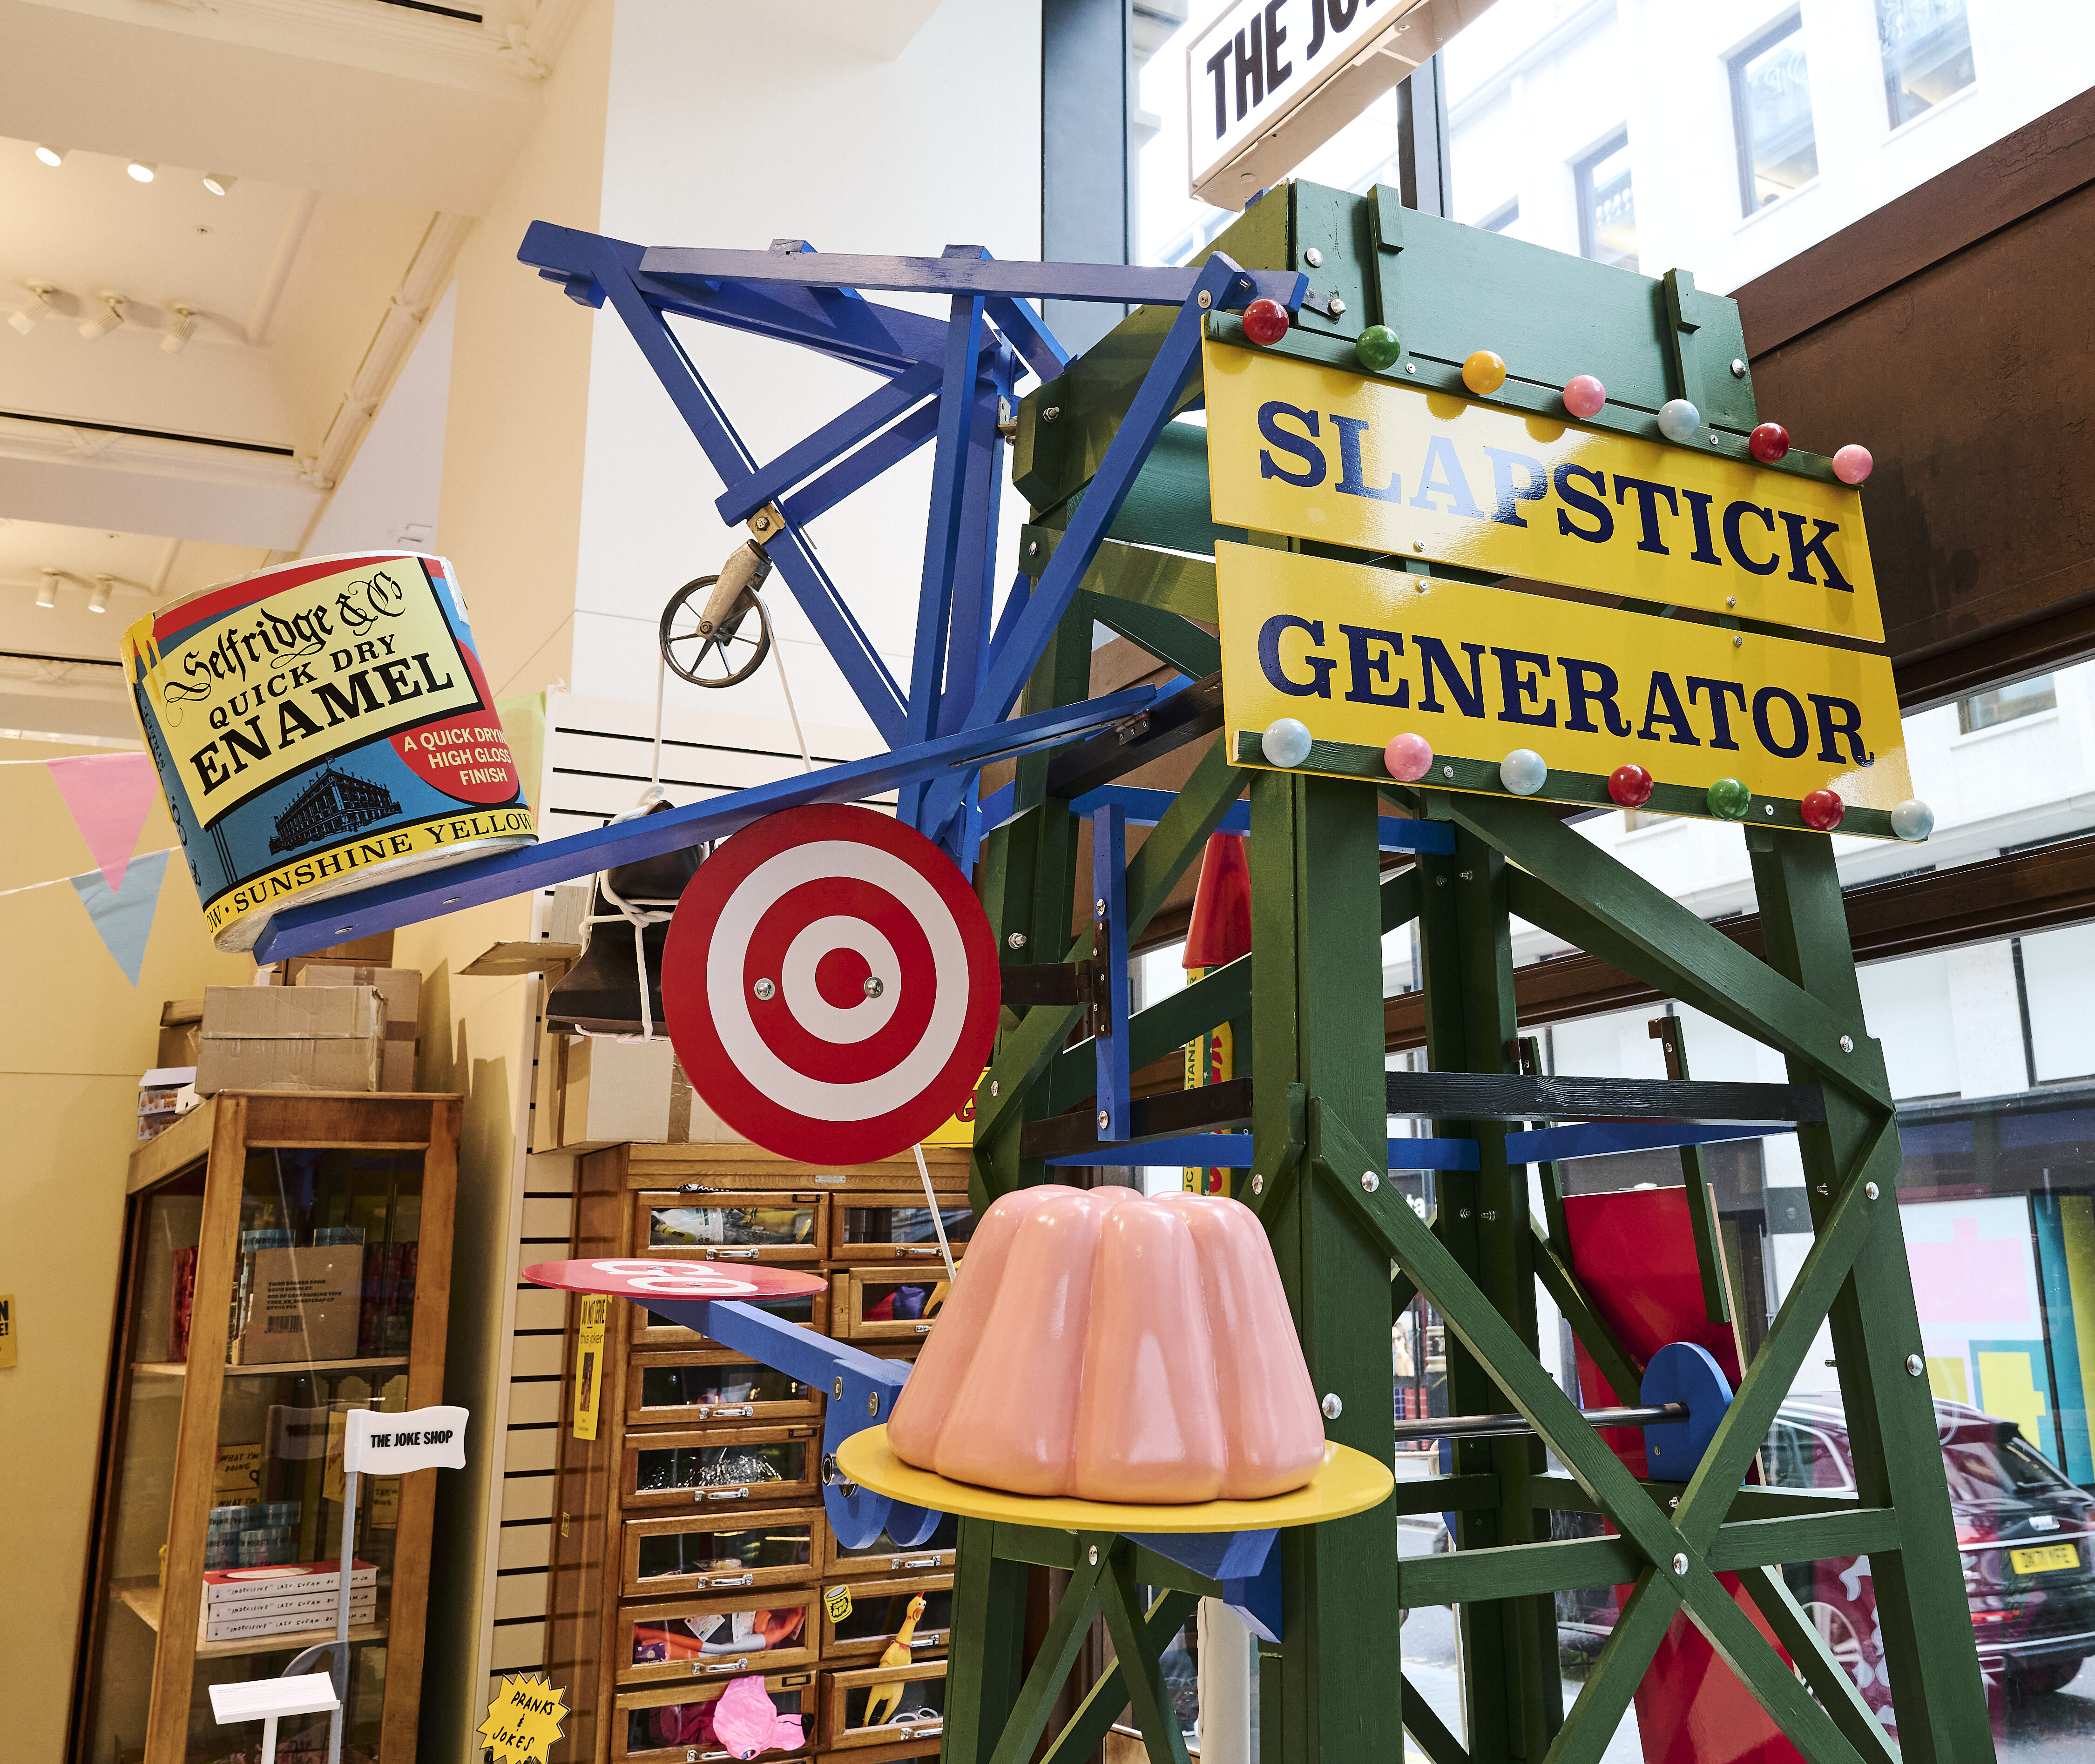 A colourful scaffolding structure with giant targets, models of jelly and paint cans. A sign reads SLAPSTICK GENERATOR